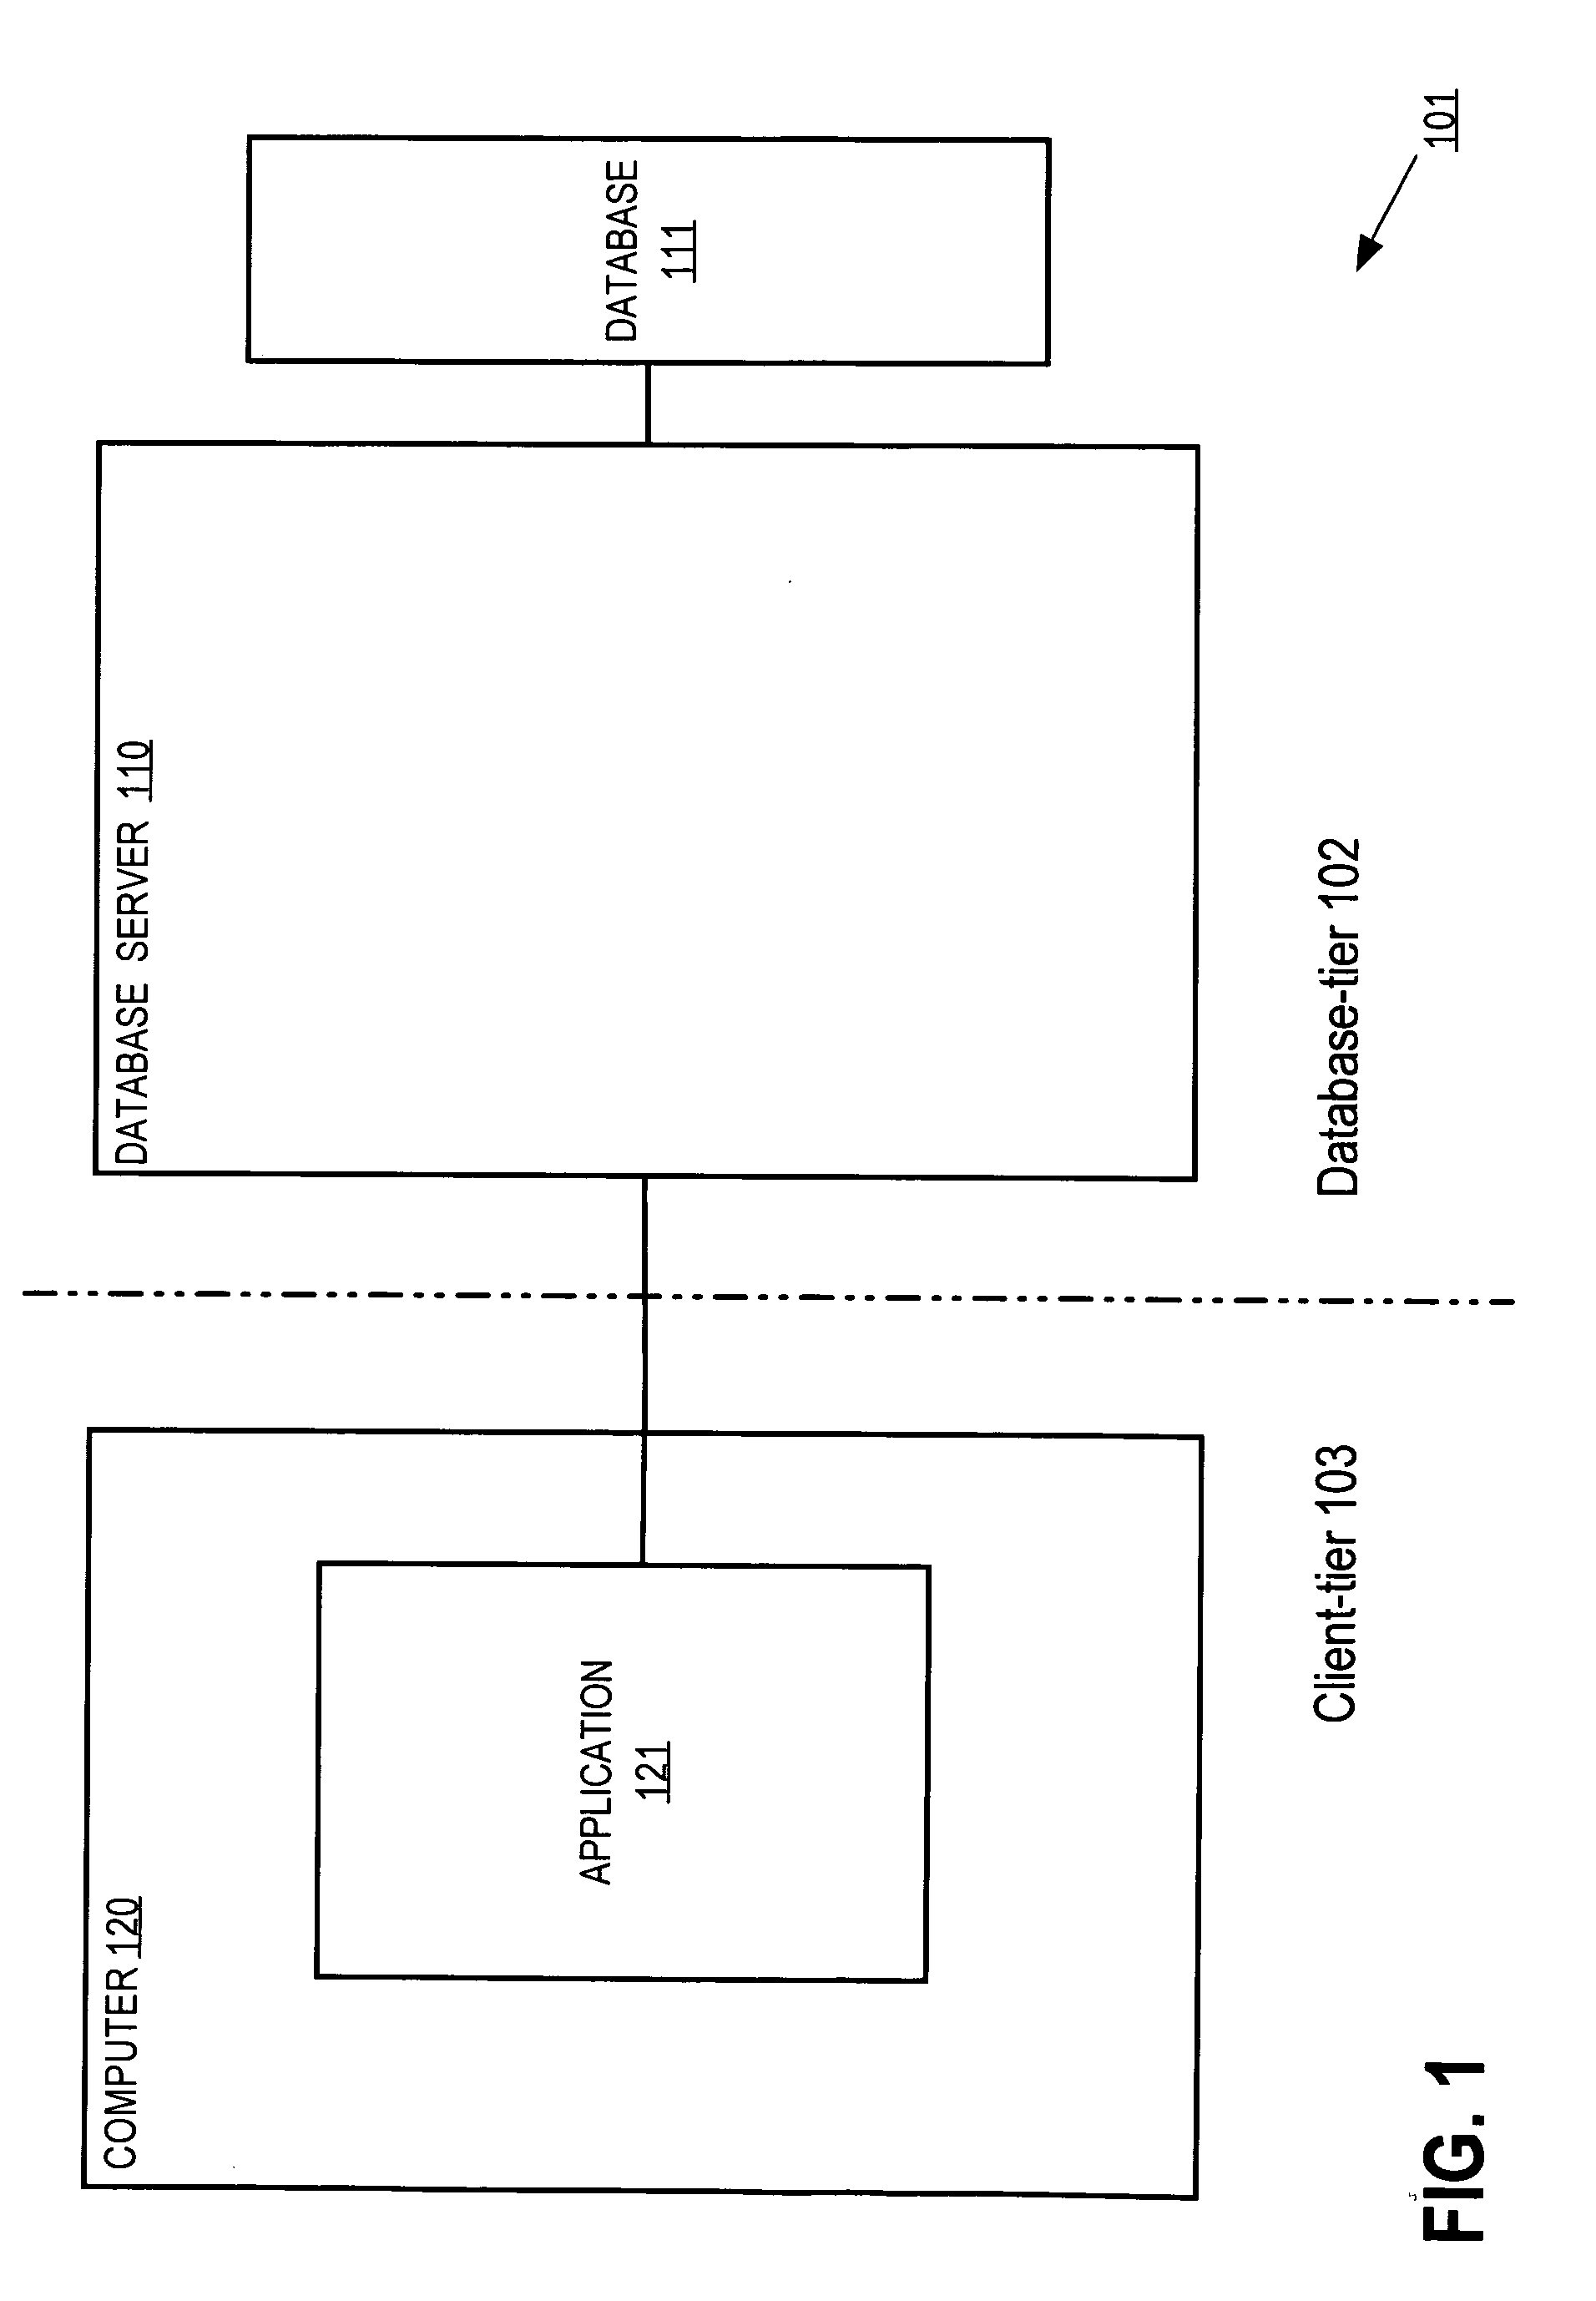 Document level indexes for efficient processing in multiple tiers of a computer system